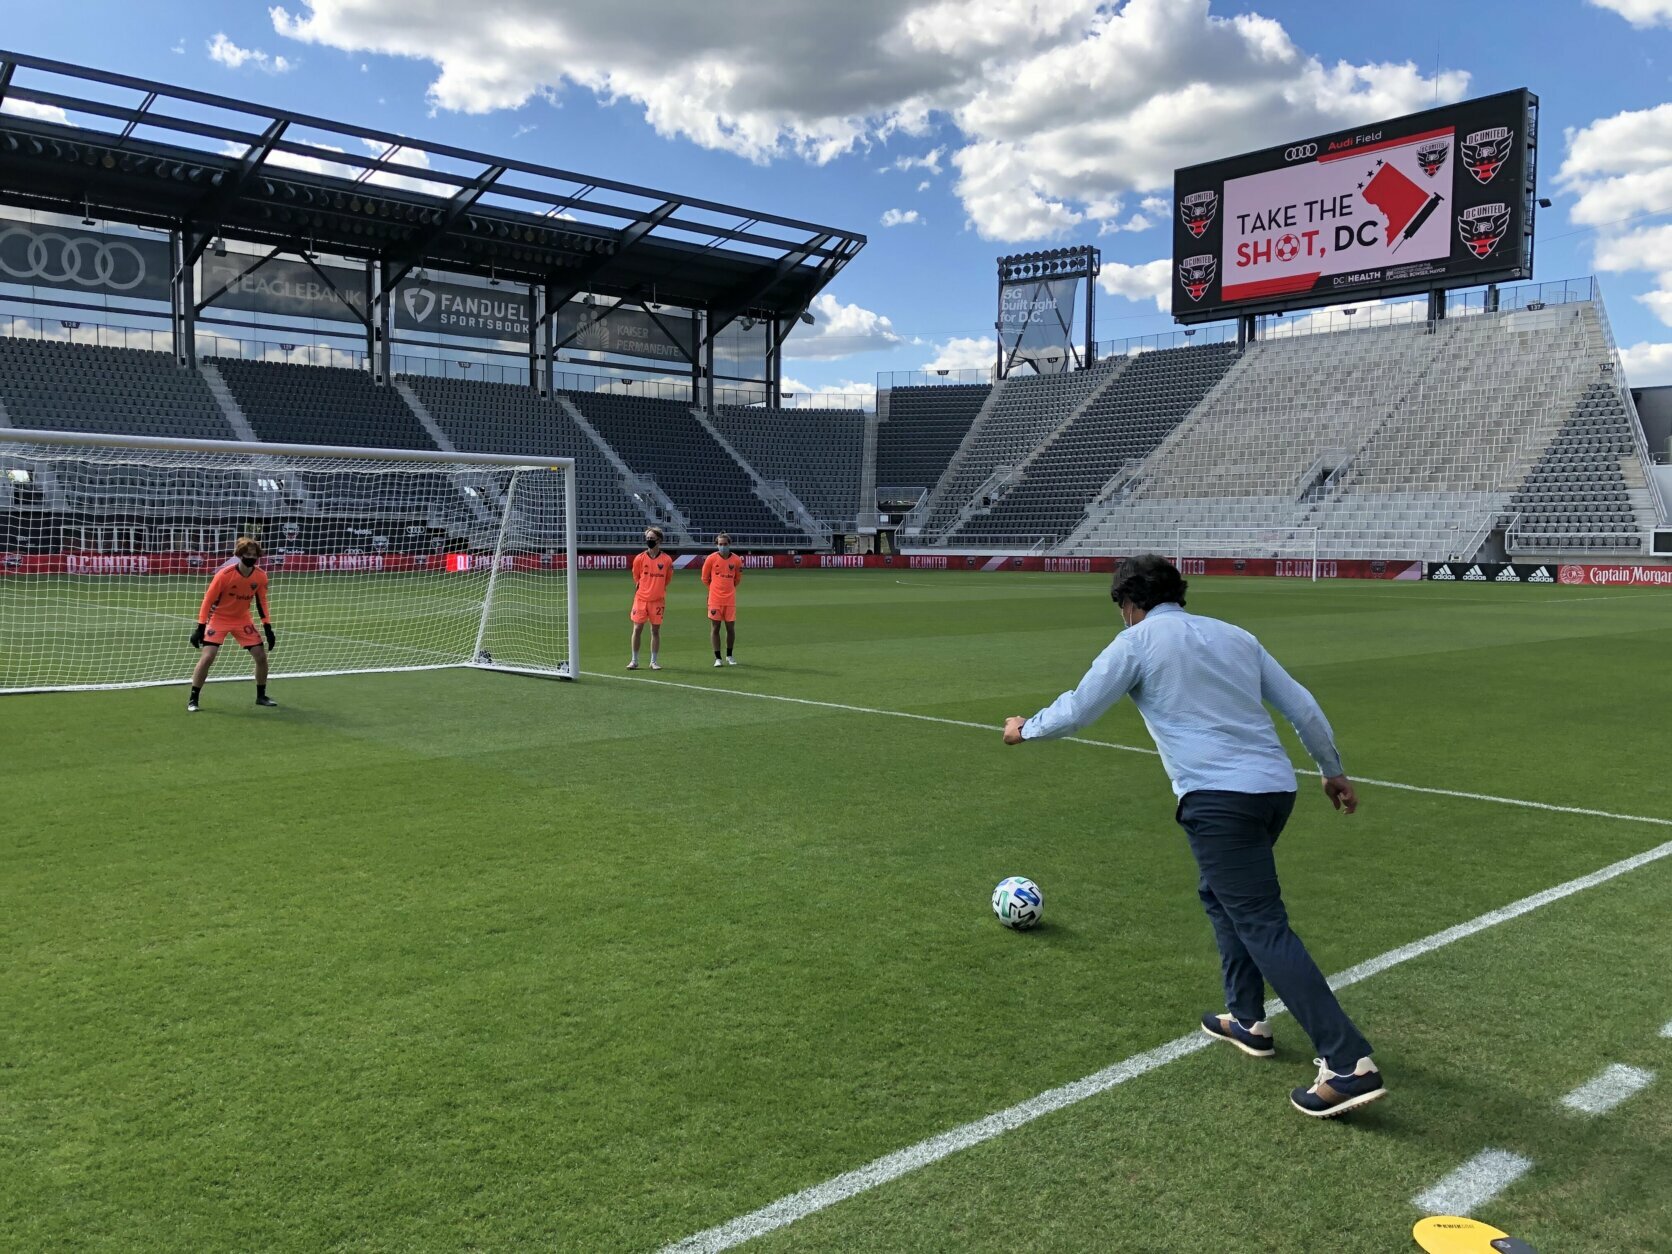 At DC United’s Audi Field on Wednesday, newly vaccinated residents got a chance to take a shot on target after they got a shot in the arm.